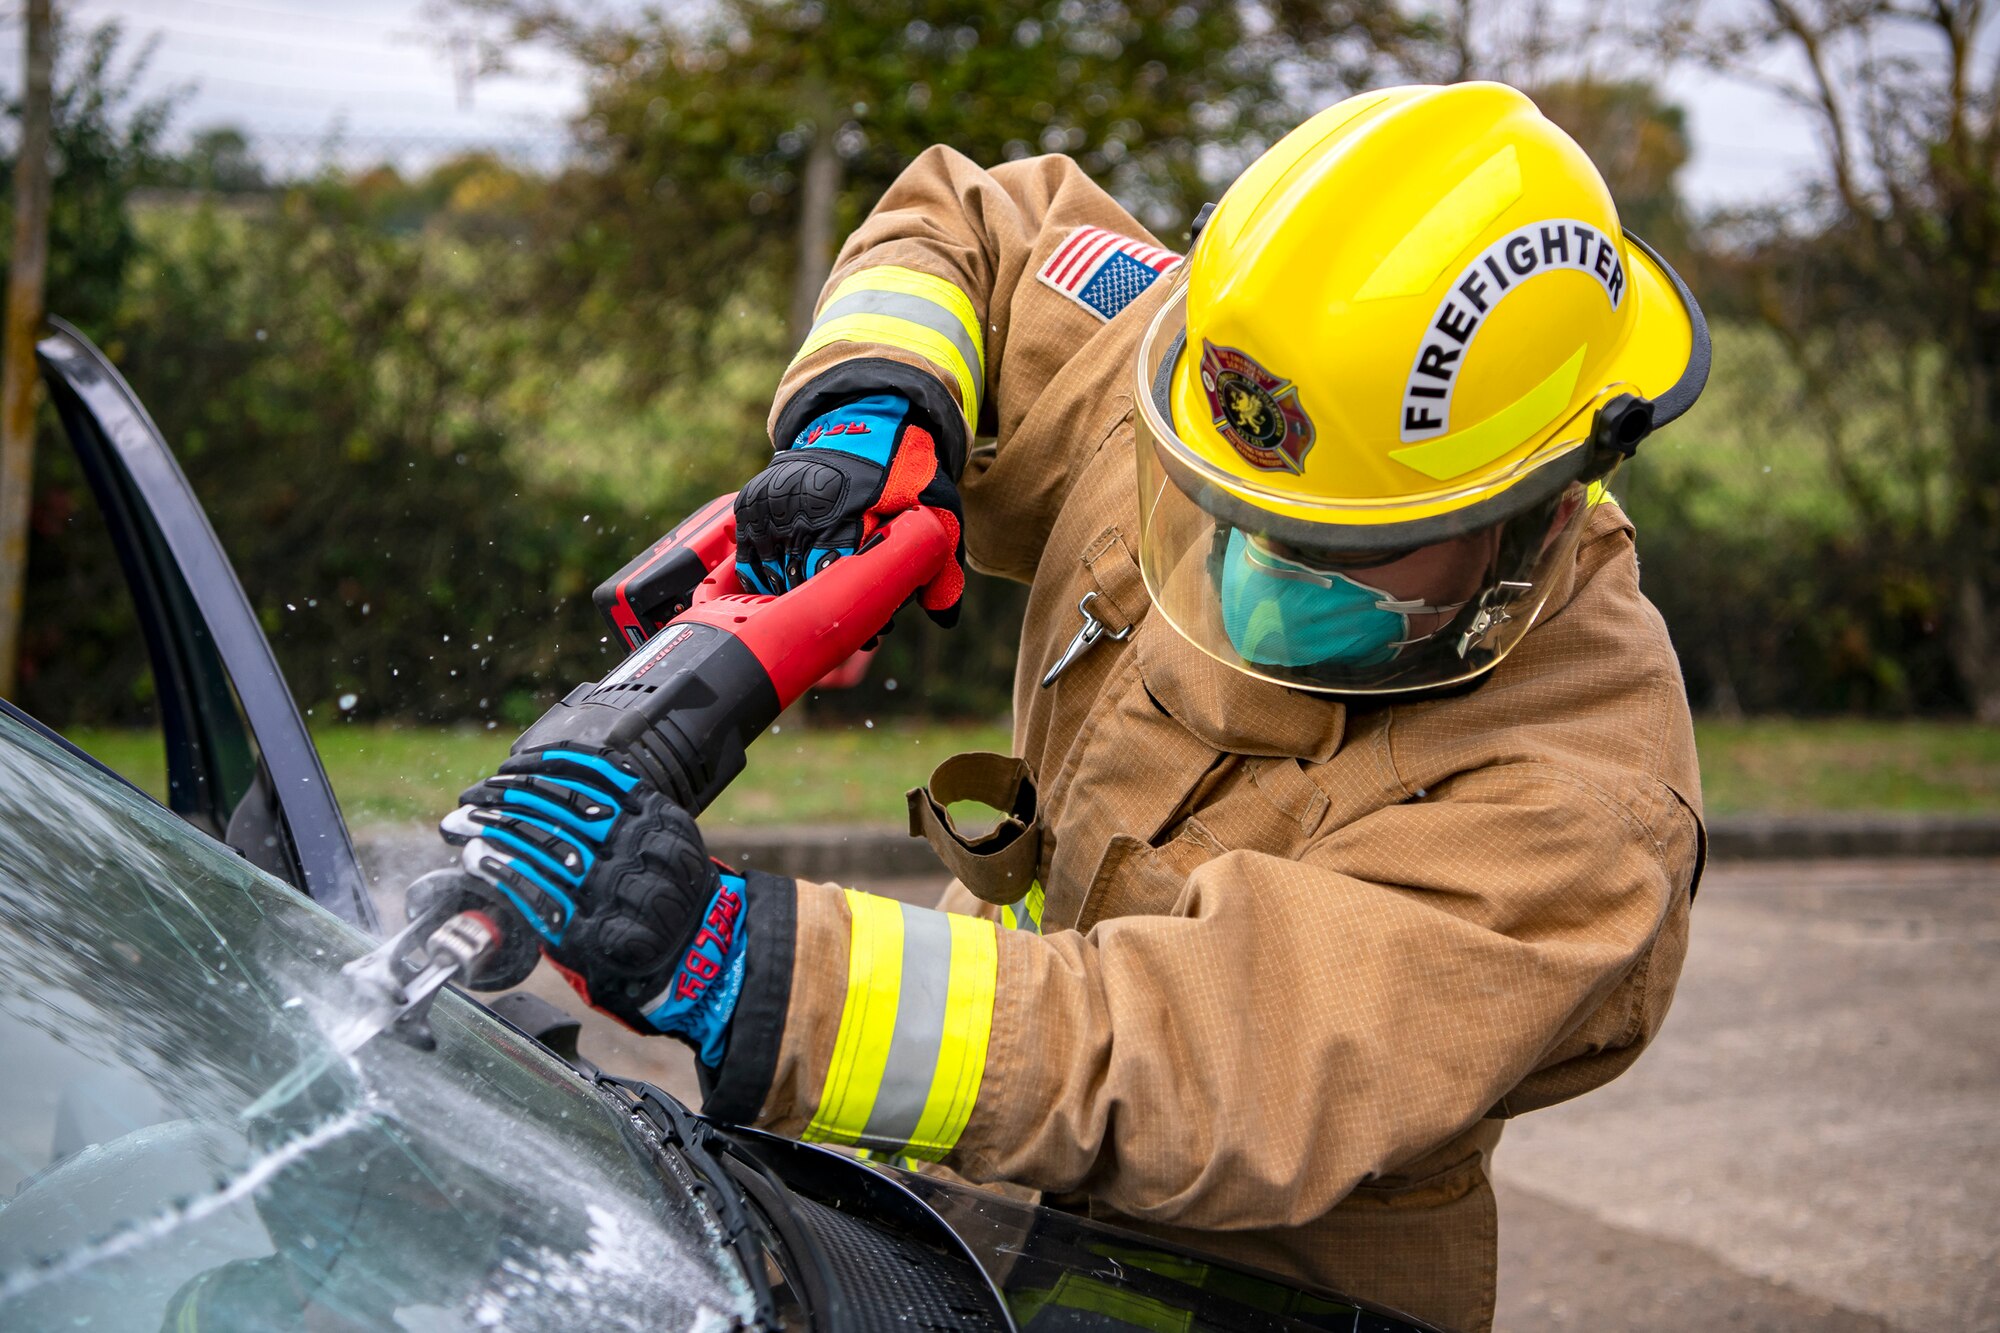 A firefighter from the 423d Civil Engineer Squadron, uses a saw to dismantle a vehicle during a rescue demonstration at RAF Alconbury, England, Oct. 12, 2022. The demonstration was part of Fire Prevention Week in which firefighters from the 423d CES educated Airmen and dependents on proper fire safety habits. (U.S. Air Force photo by Staff Sgt. Eugene Oliver)